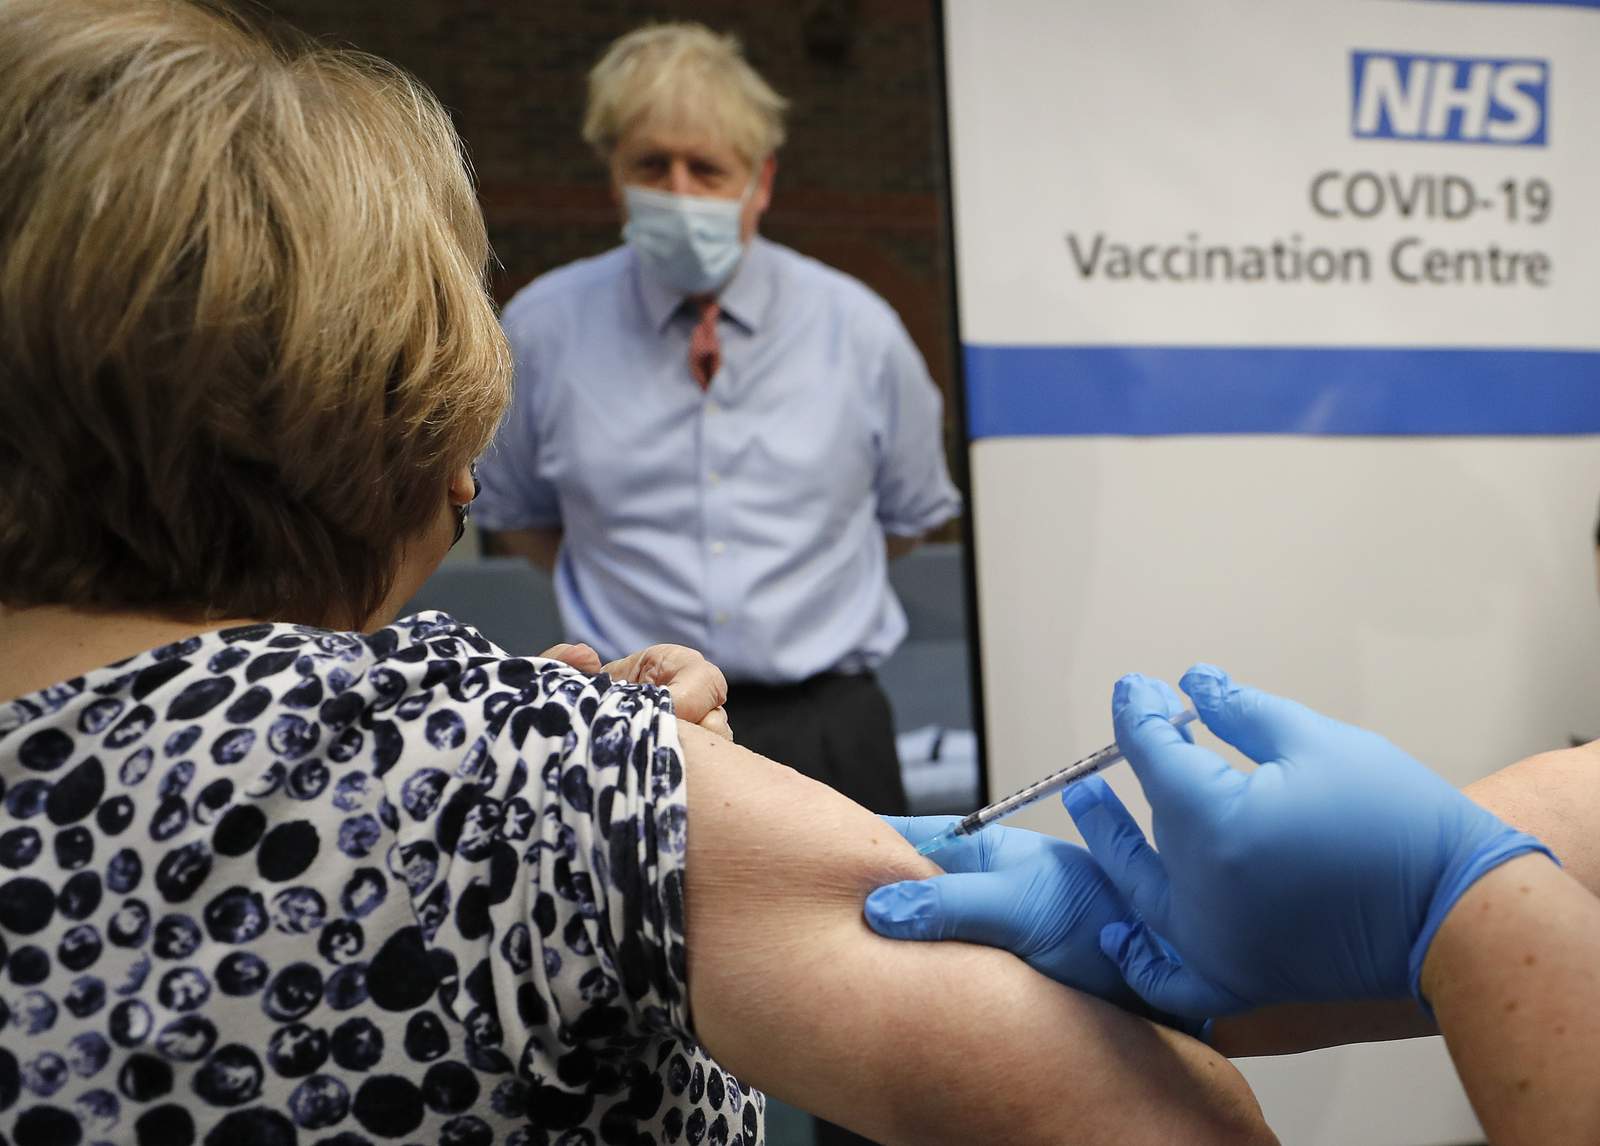 UK ramps up vaccine rollout, targets every adult by autumn